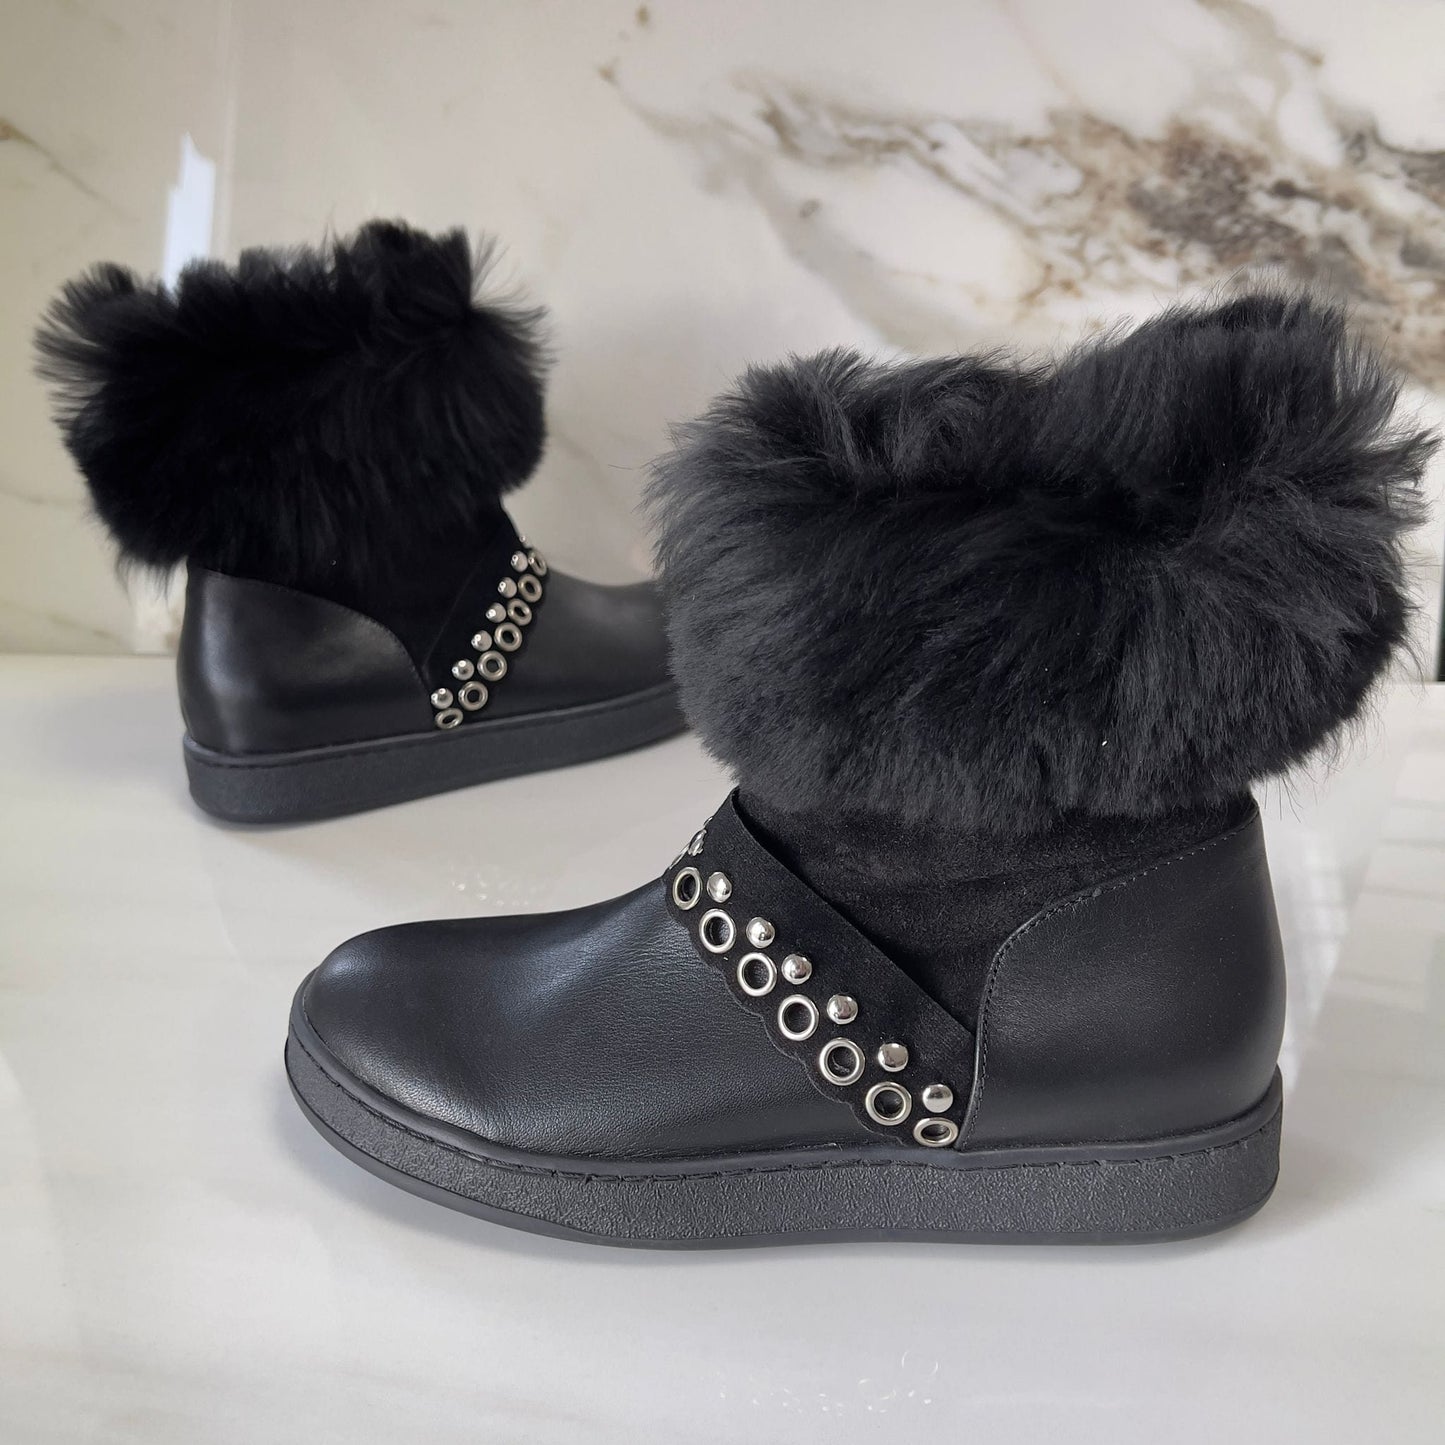 Black leather and fur ankle high ladies snow boots